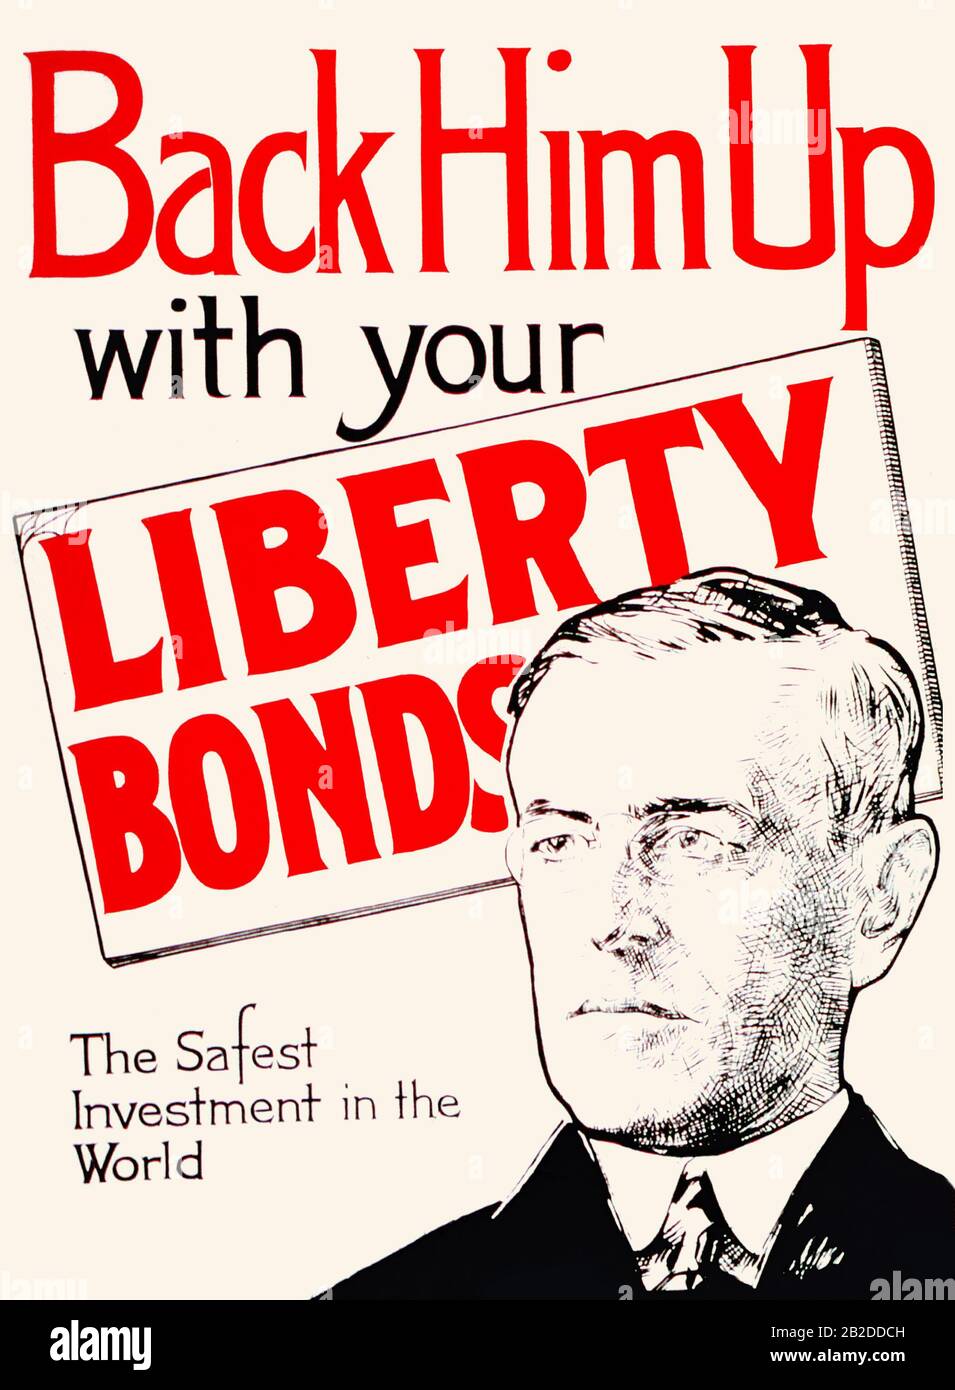 Back Him Up with your Liberty Bonds Stock Photo